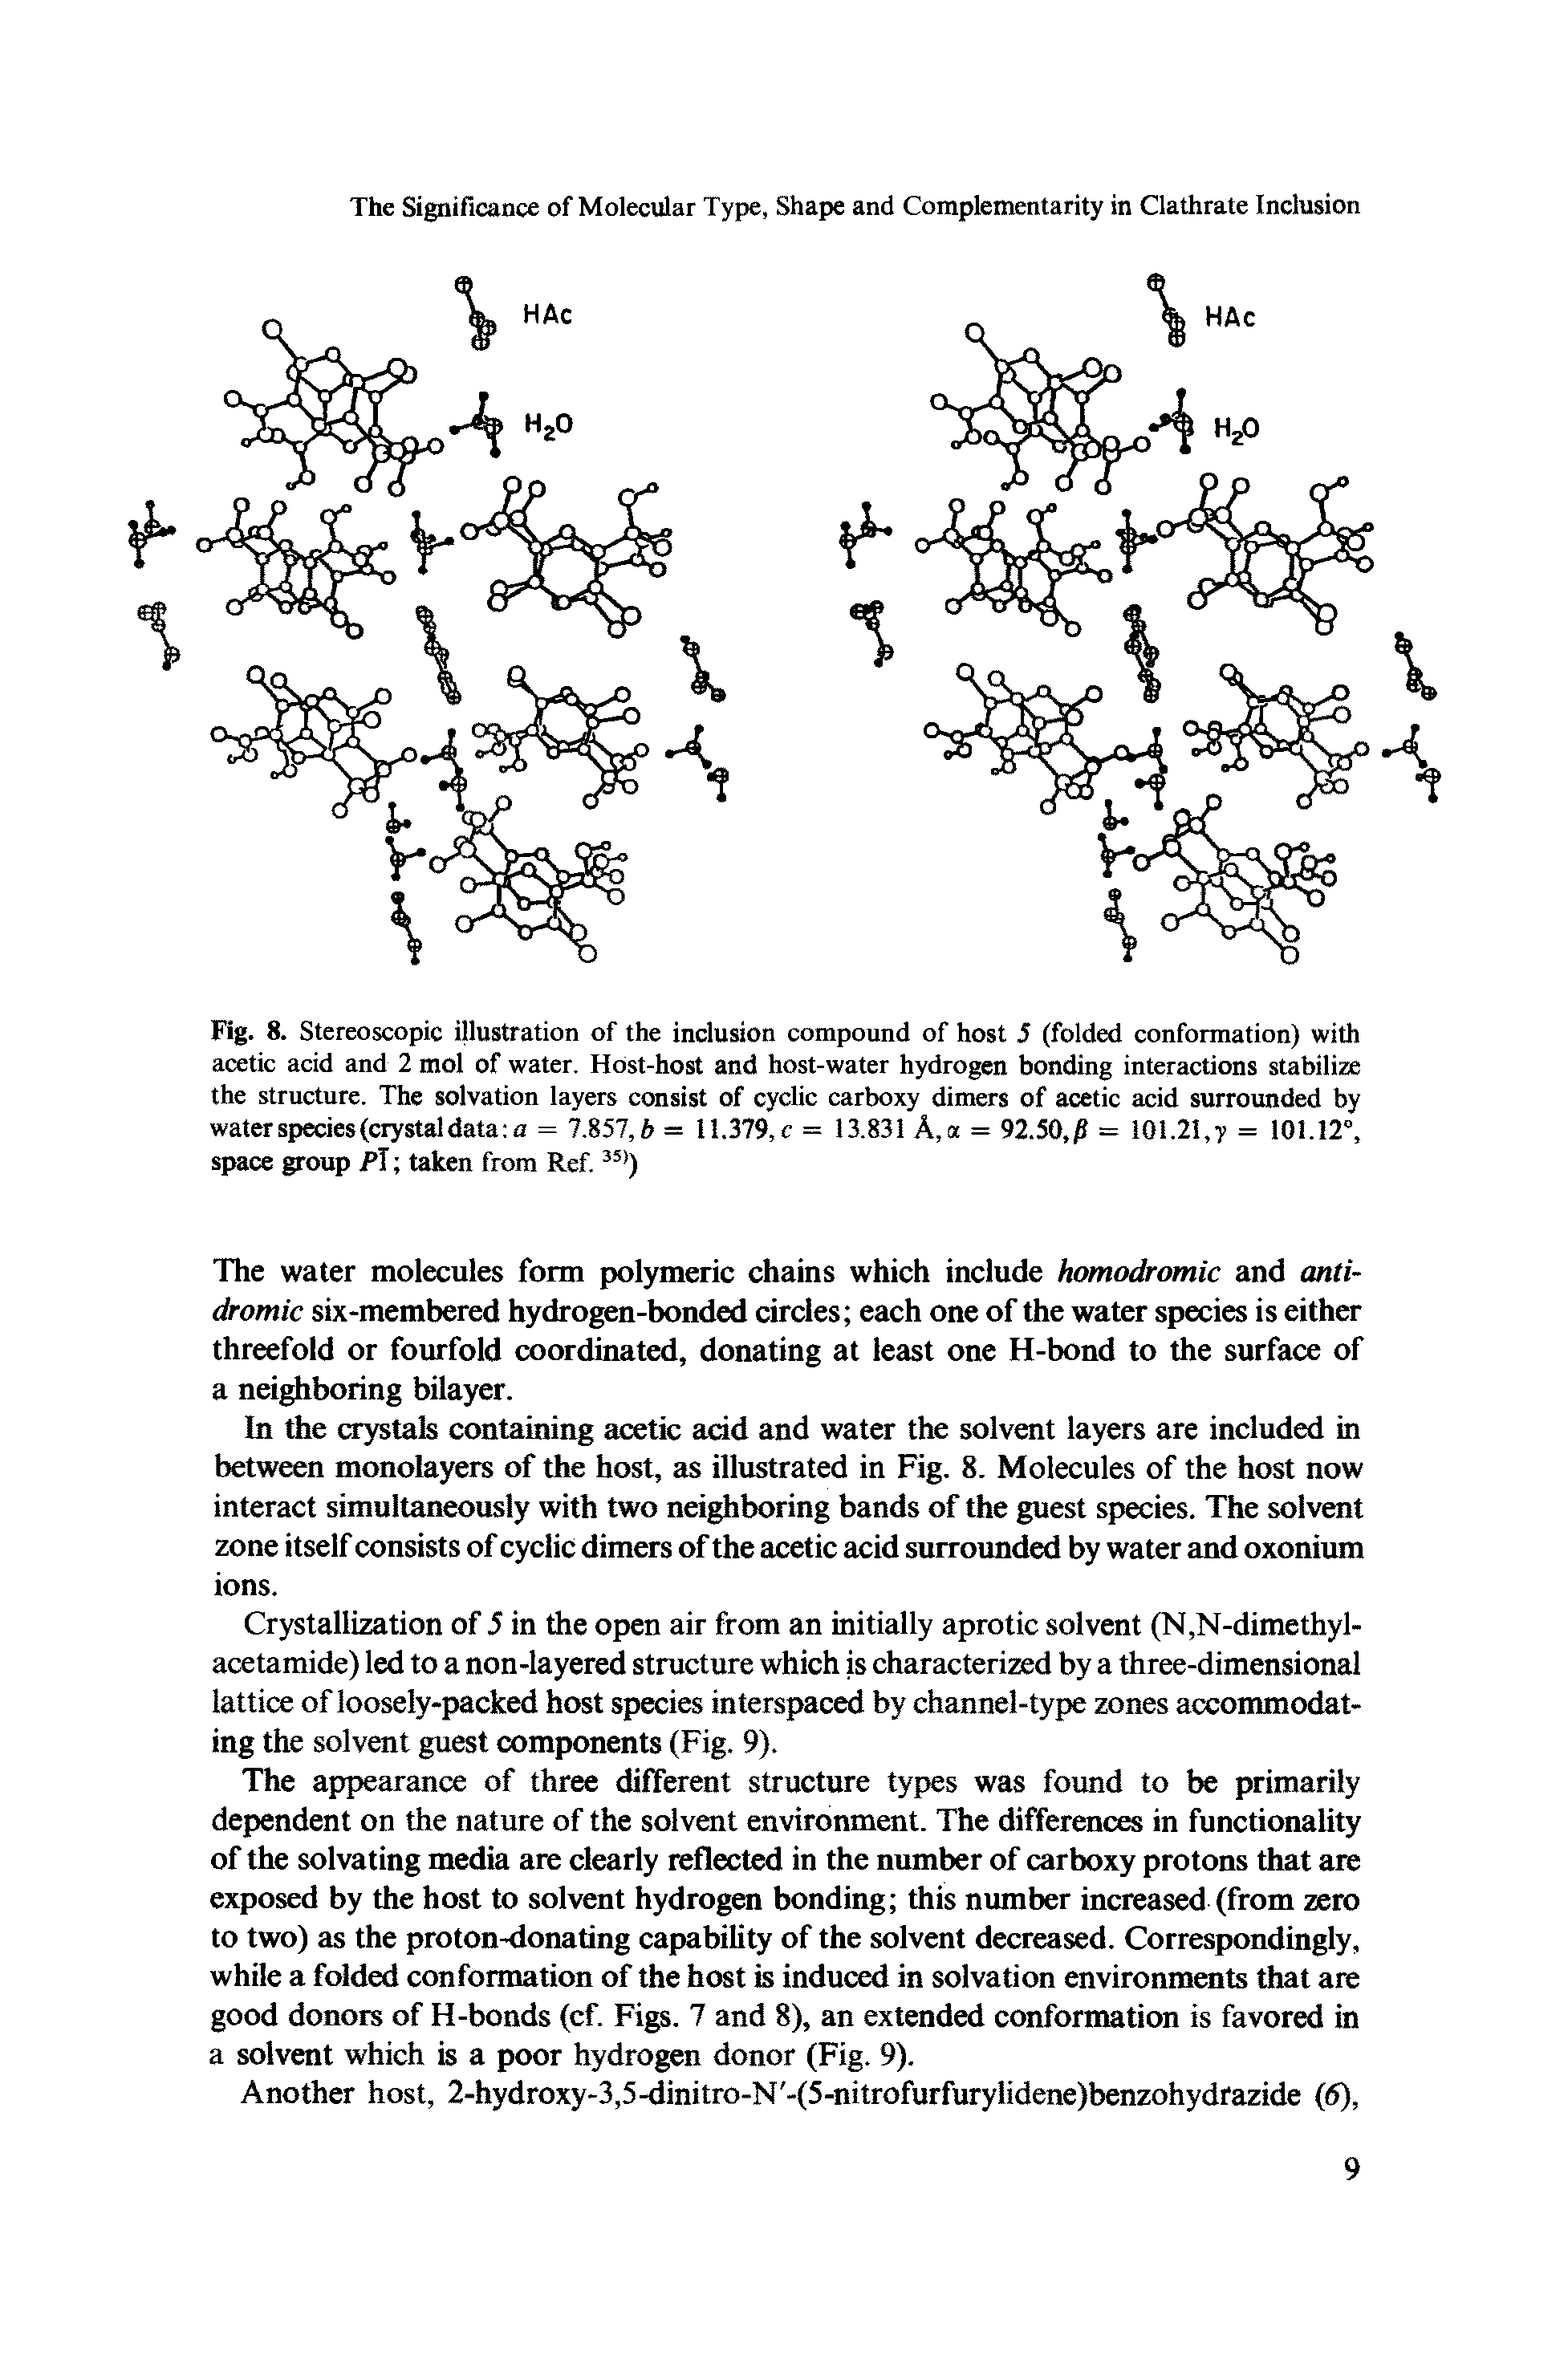 Fig. 8. Stereoscopic illustration of the inclusion compound of host 5 (folded conformation) with acetic acid and 2 mol of water. Host-host and host-water hydrogen bonding interactions stabilize the structure. The solvation layers consist of cyclic carboxy dimers of acetic acid surrounded by water species (crystal data a = 7.857, b = 11.379,c = 13.831 A,a = 92.50,/i = 101.21, y = 101.12°, space group Pi taken from Ref. 351)...